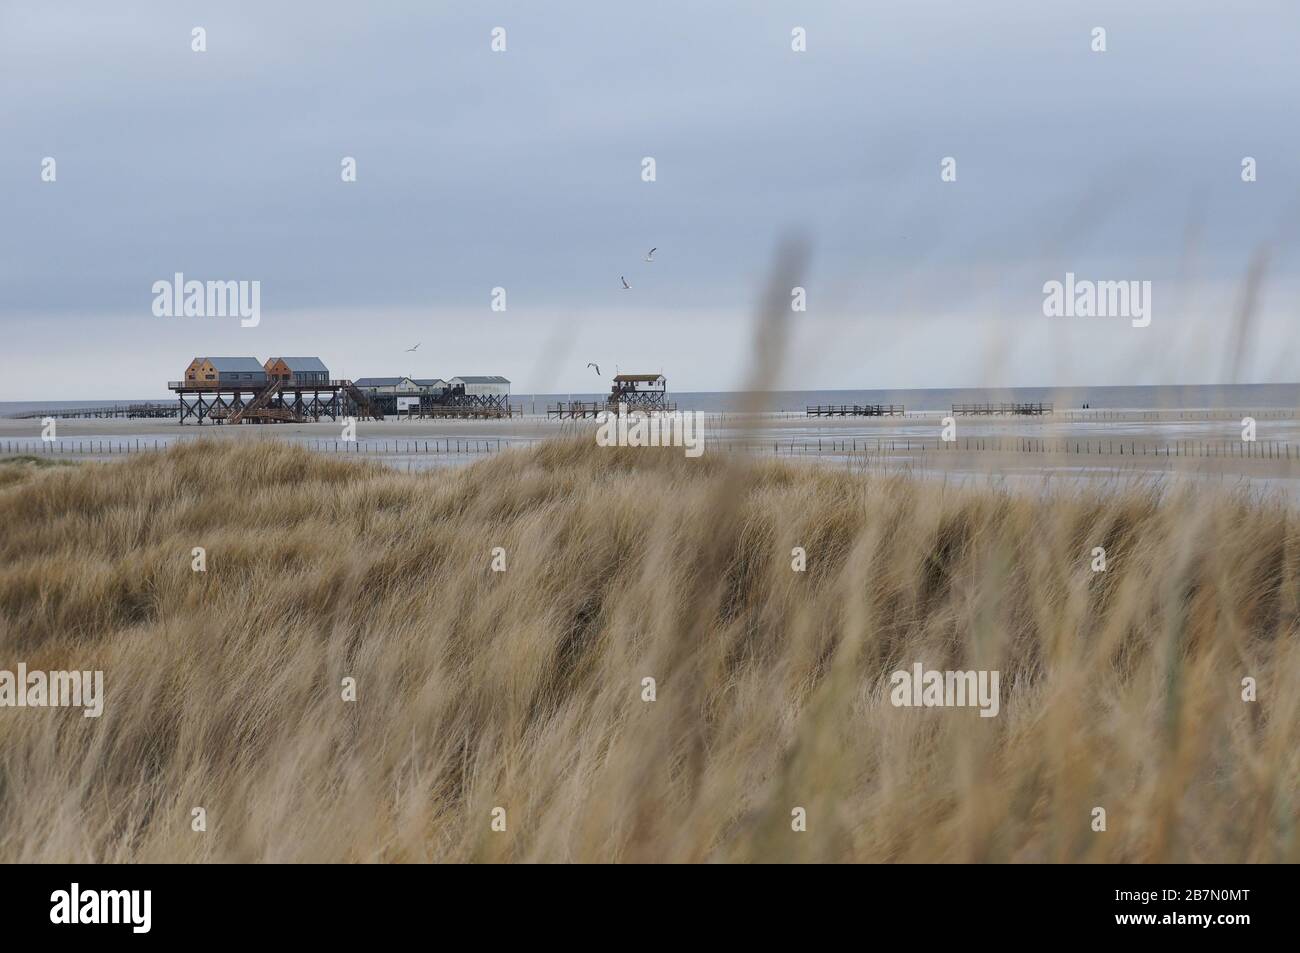 Stilt houses on the beach of St. Peter Ording, North Sea Germany Stock Photo